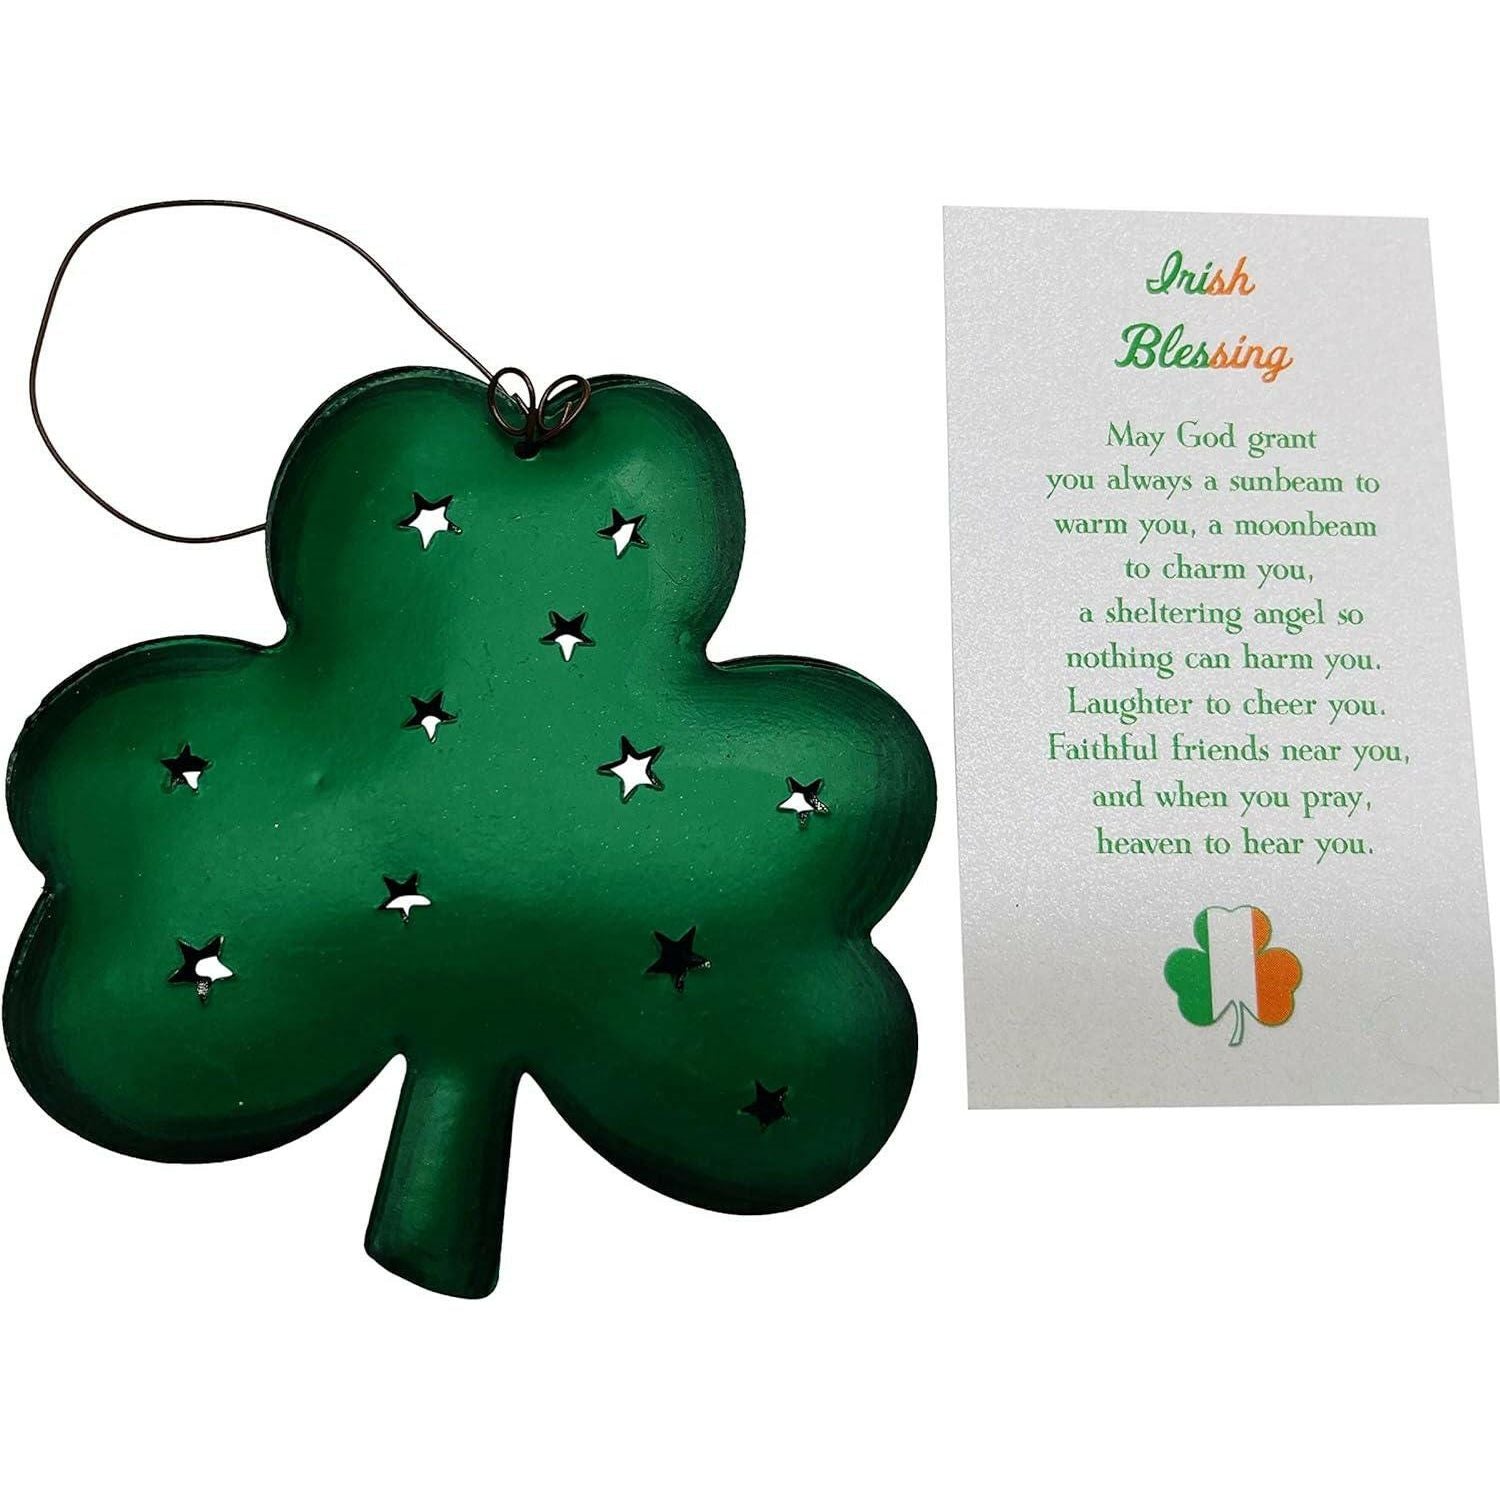 Shamrock Ornament Hanging Tin Metal Irish Blessing Decoration Set with Story Card Pack for Saint Patricks Day or Christmas